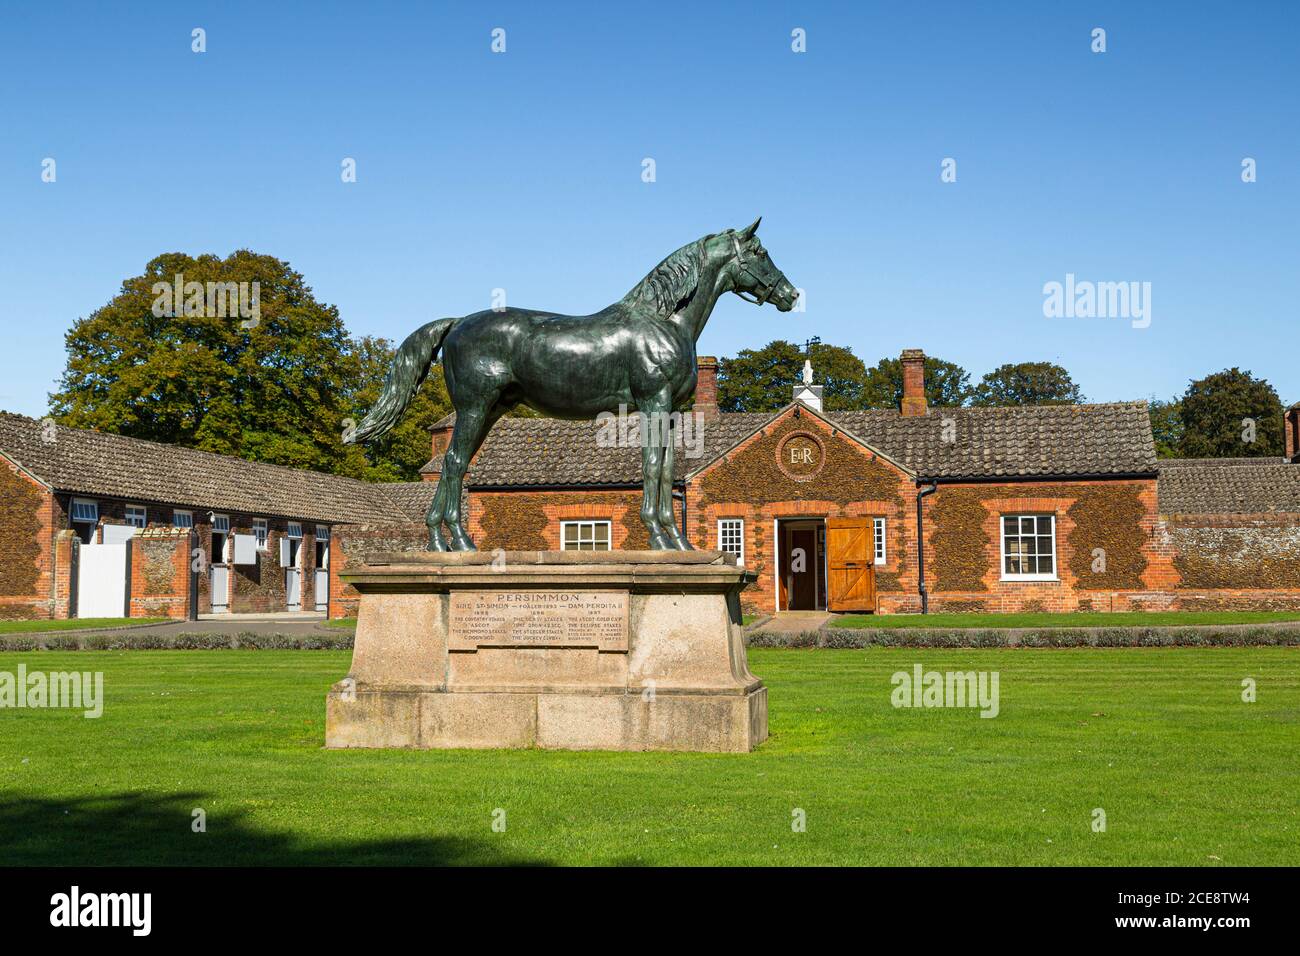 Statue of the  Prince of Wales racehorse Persimmon in front of Sandringham stud. Stock Photo